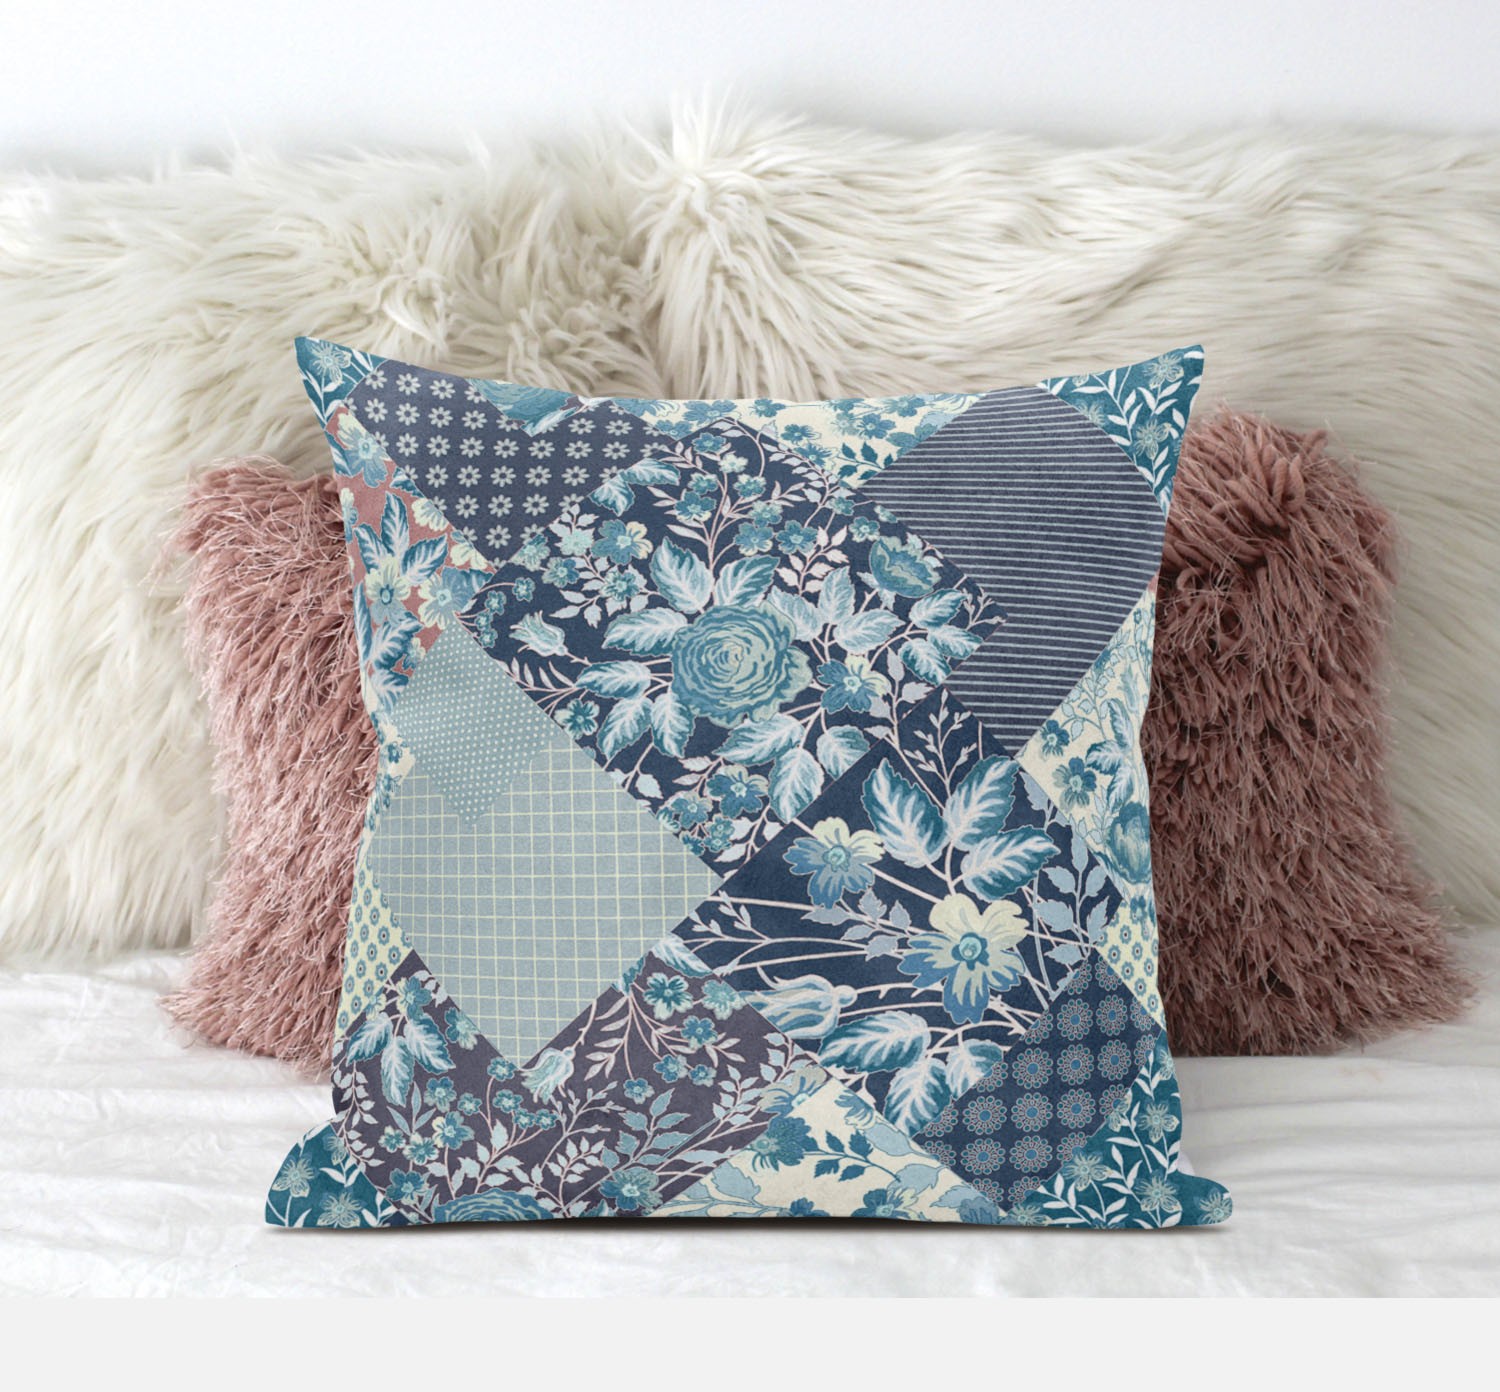 18" Blue White Floral Suede Throw Pillow-411433-1